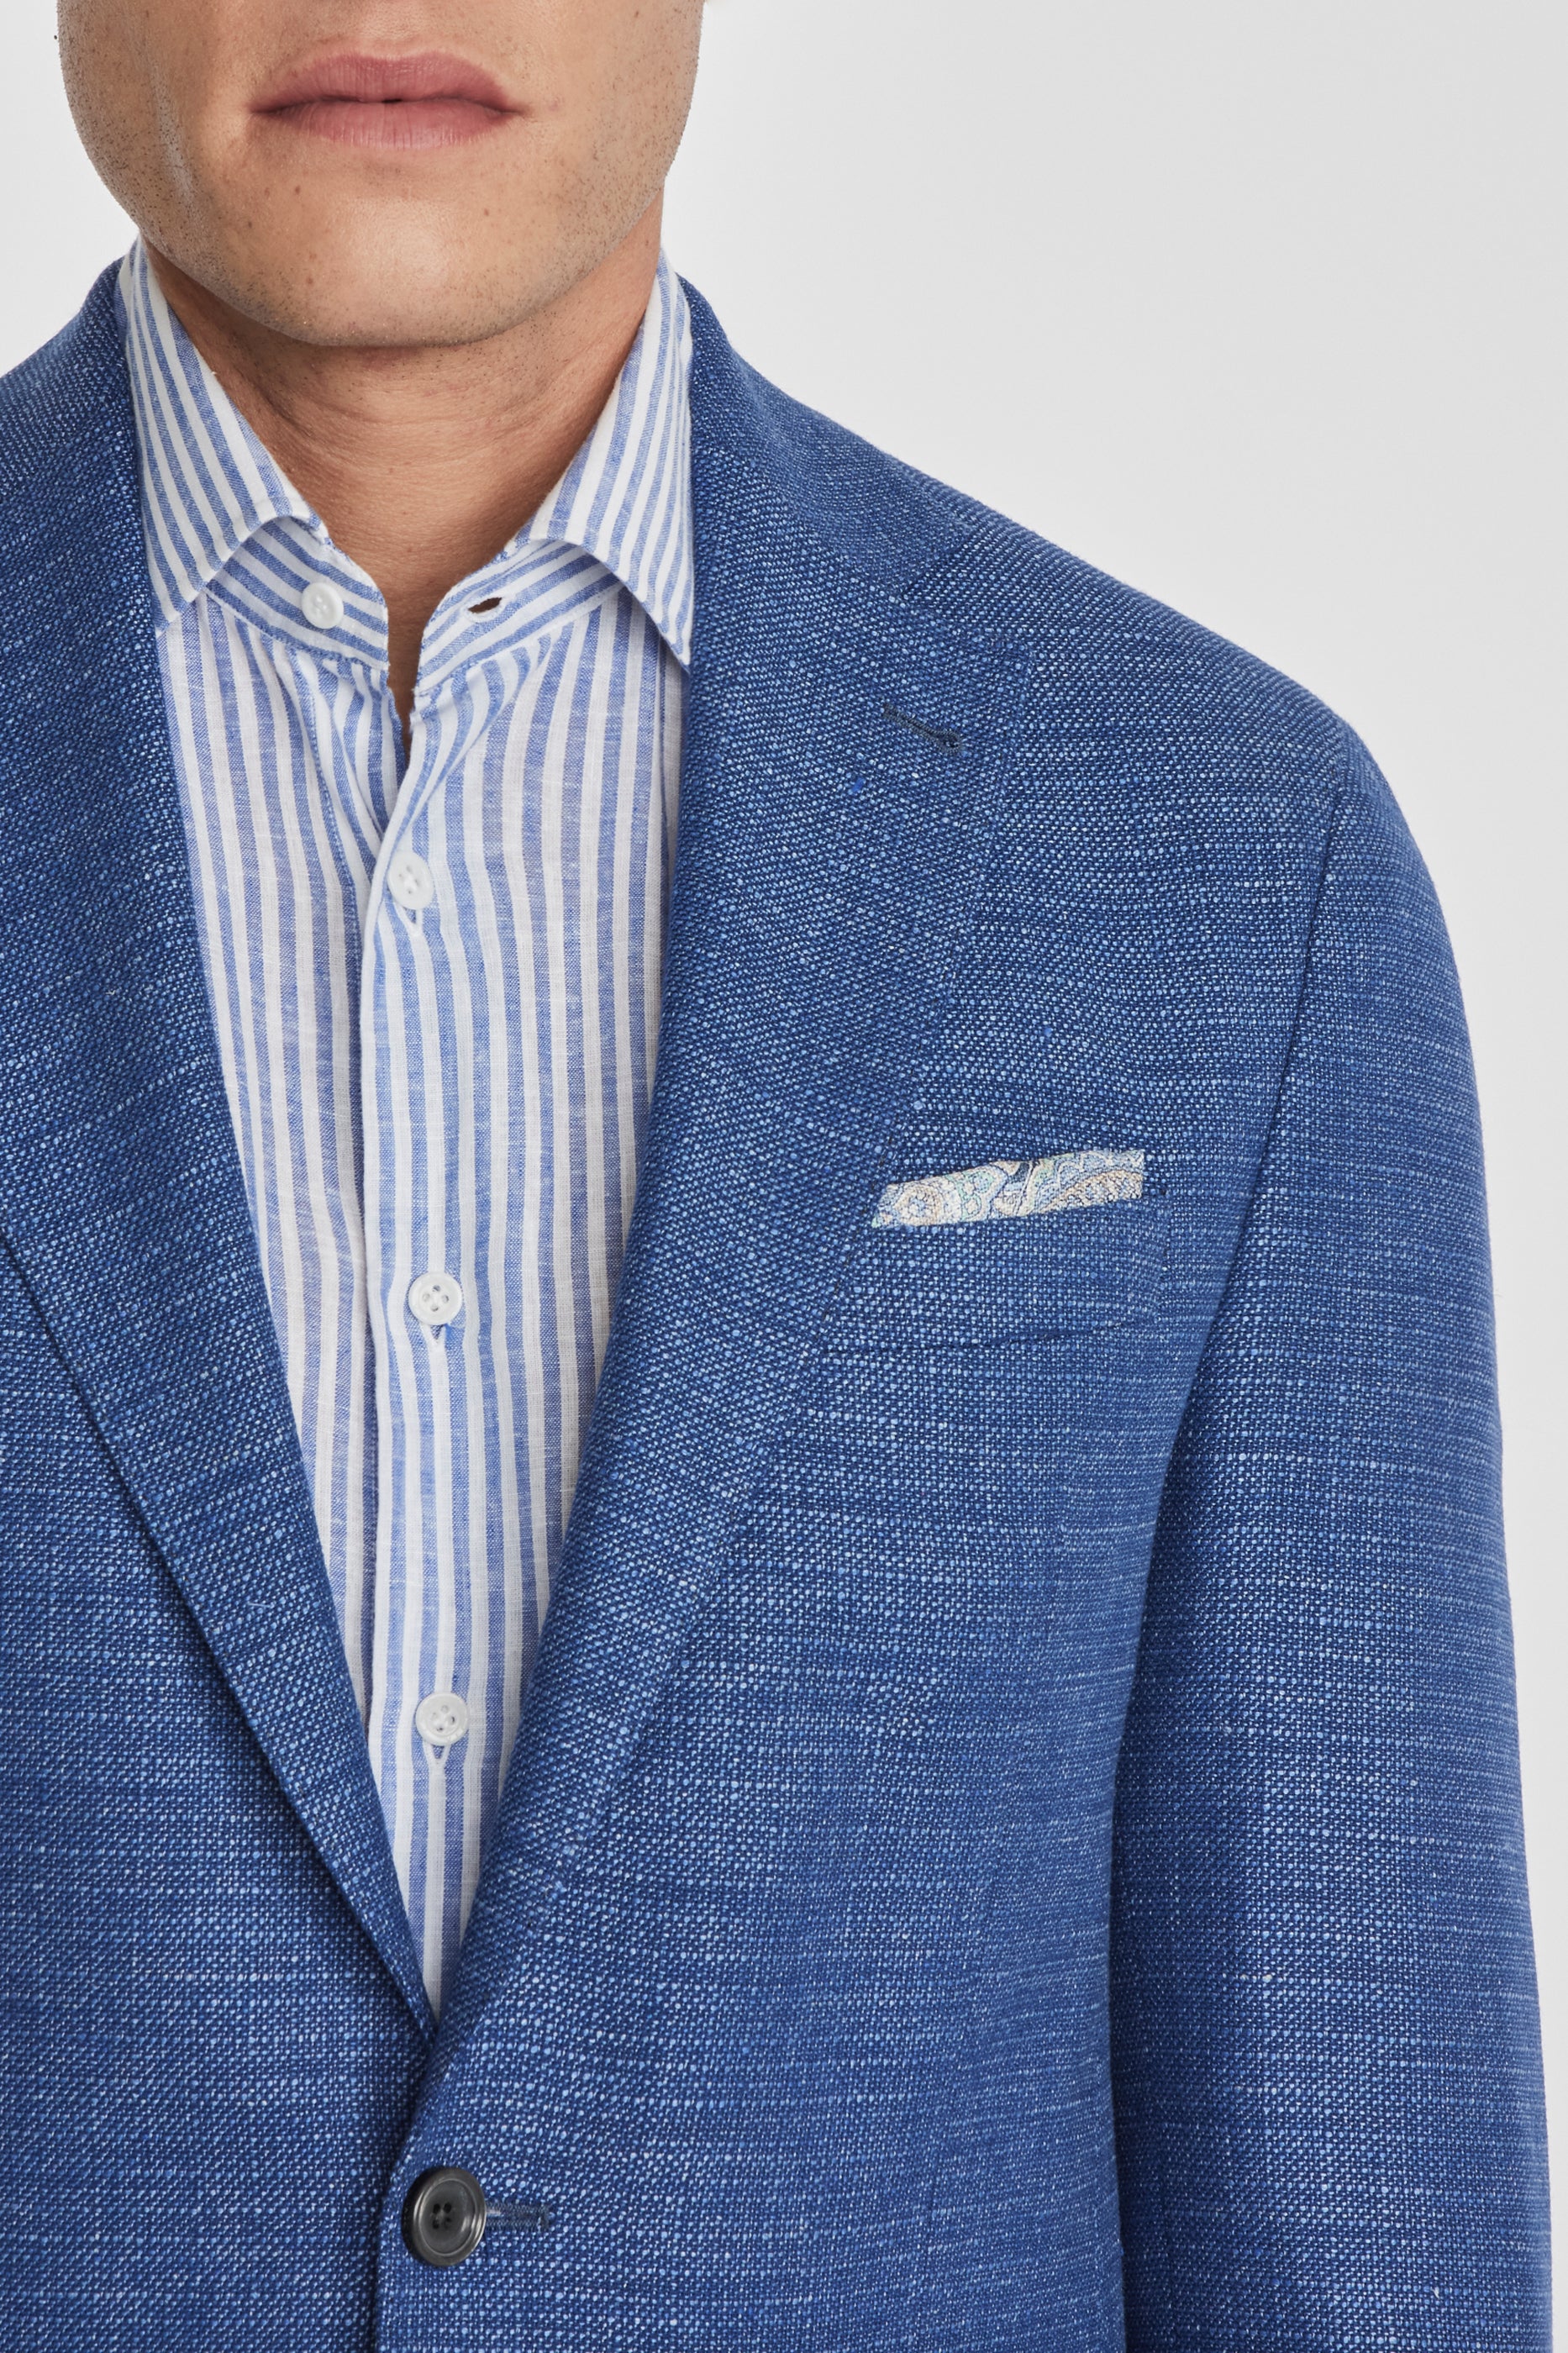 CK 2 BTN BLUE MINI HOUNDSTOOTH CHECK SPORTCOAT